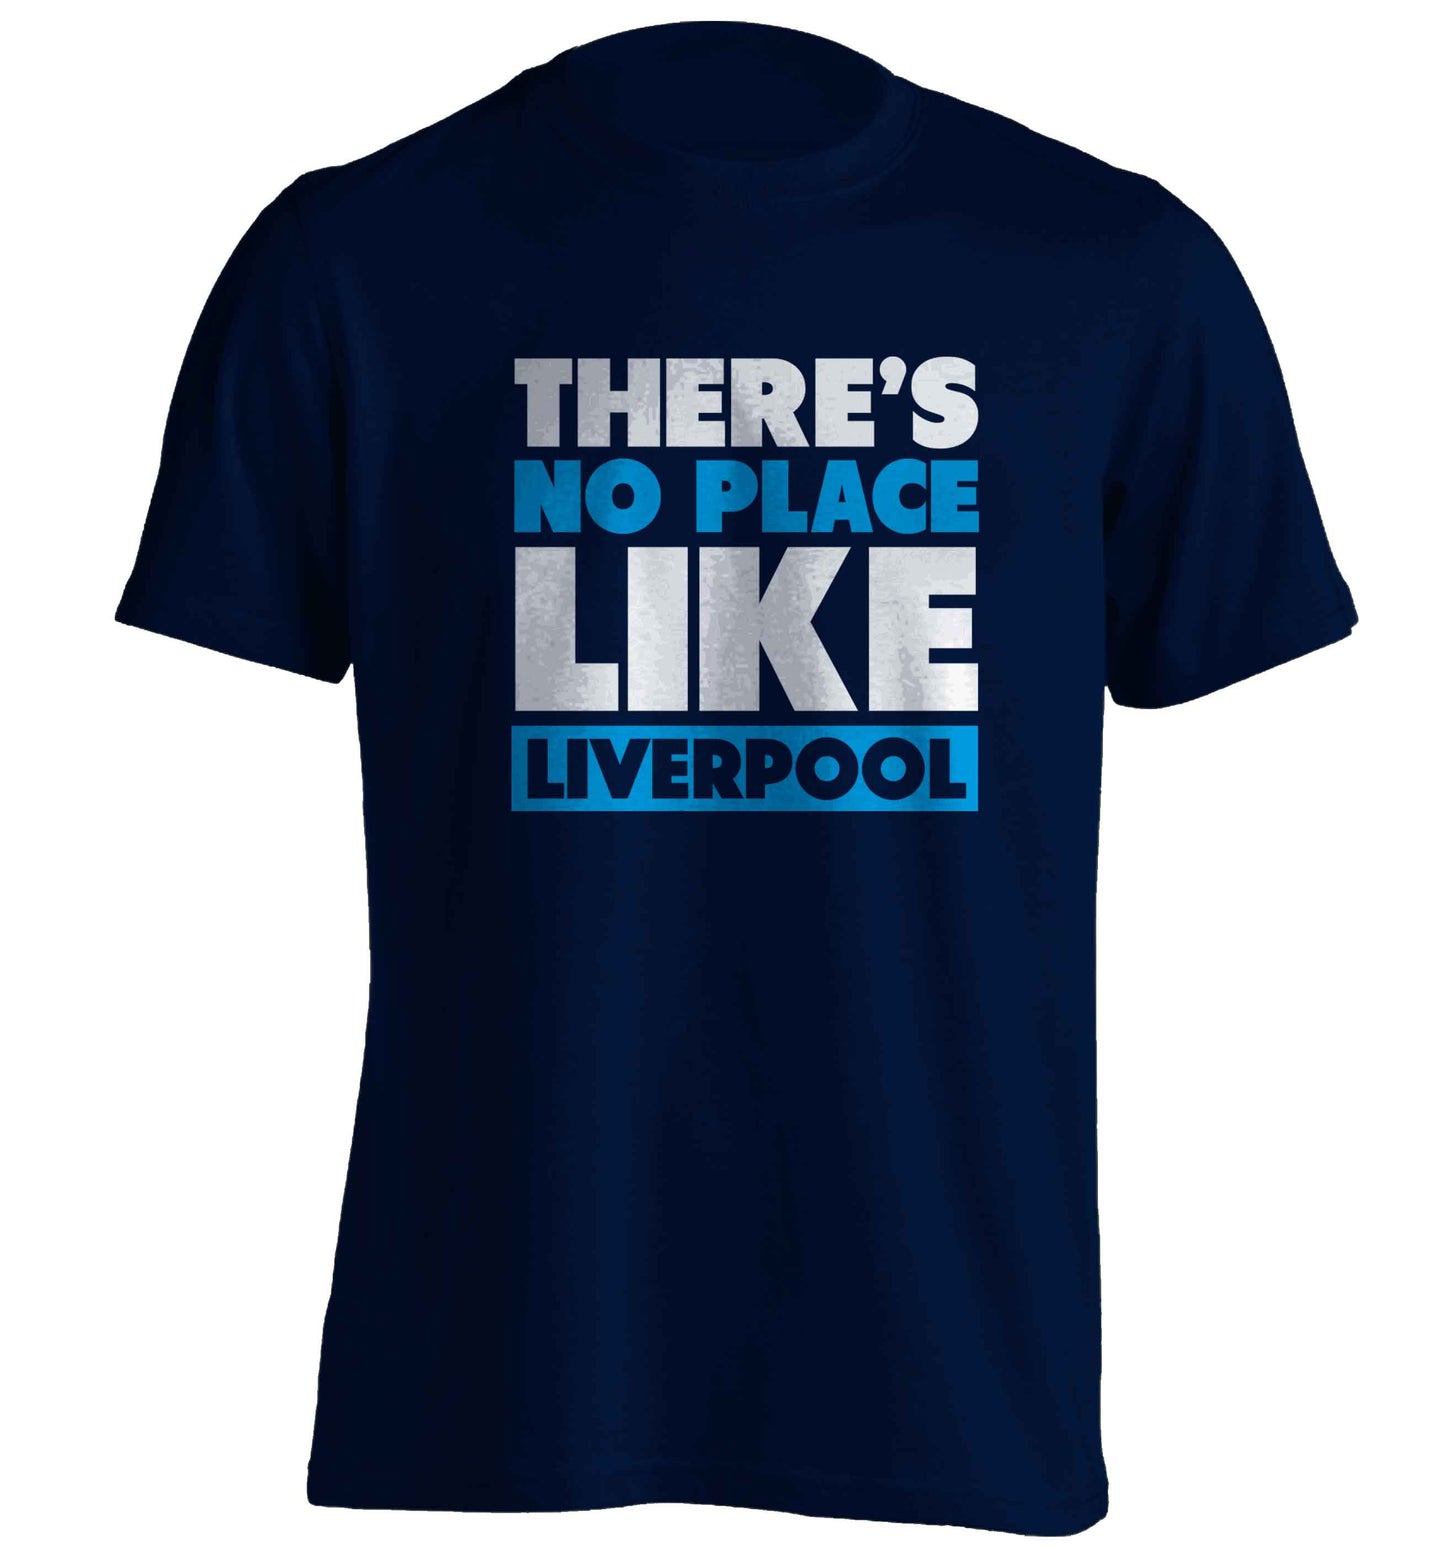 There's no place like Liverpool adults unisex navy Tshirt 2XL